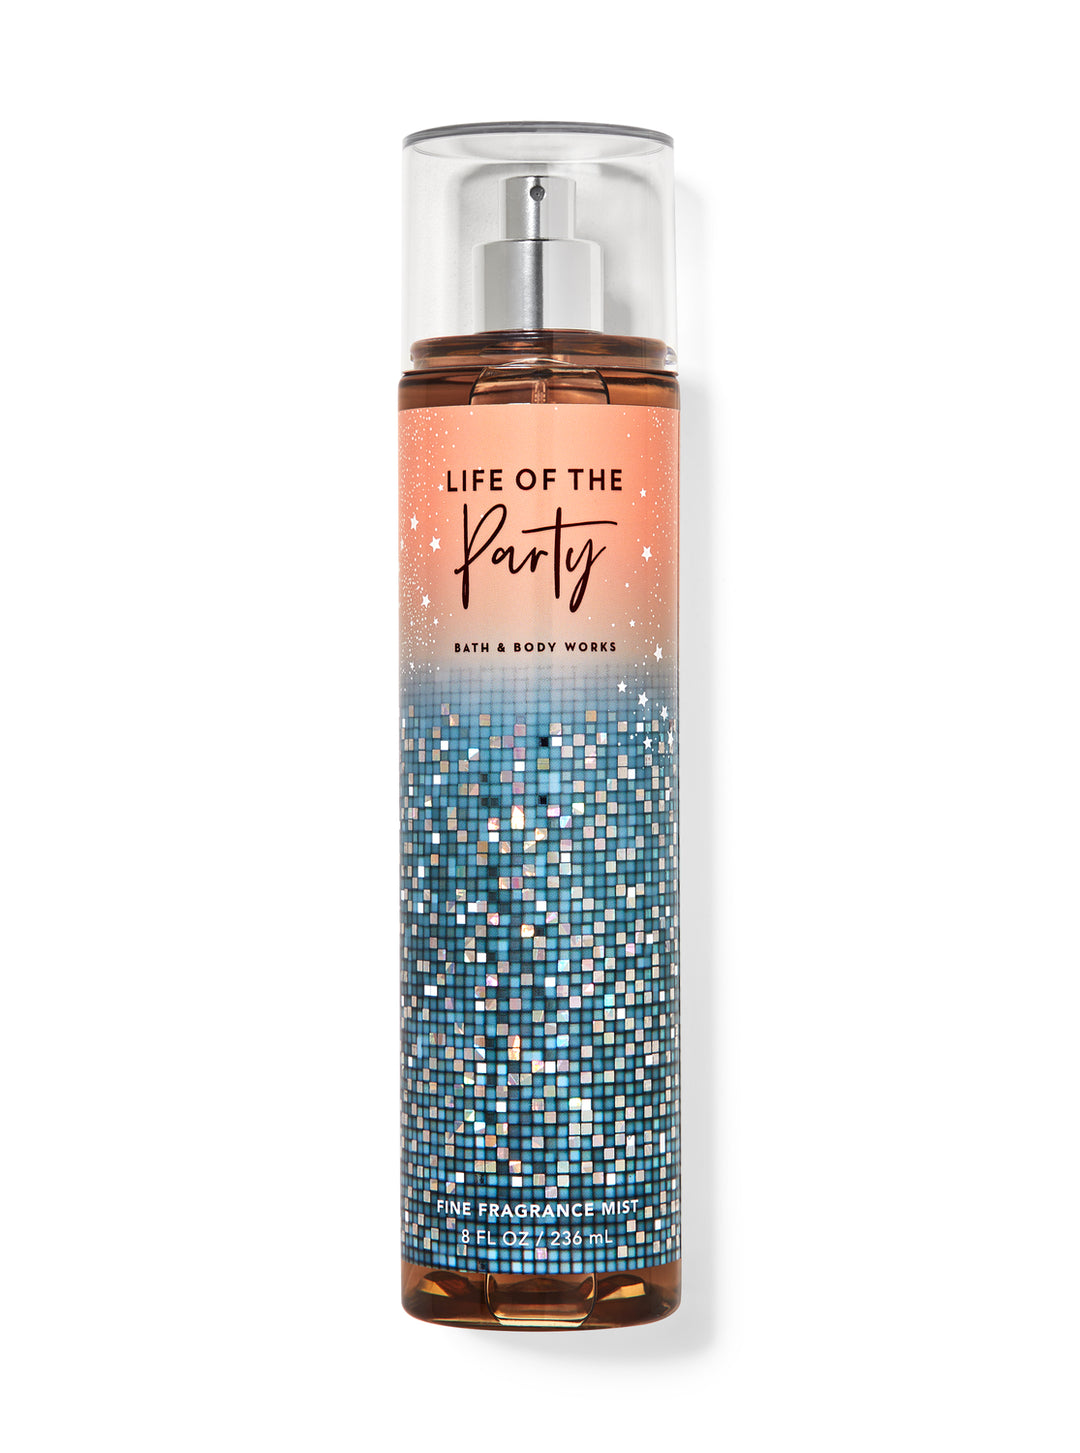 Bath & Body Works LIFE OF THE PARTY Fine Fragrance Mist